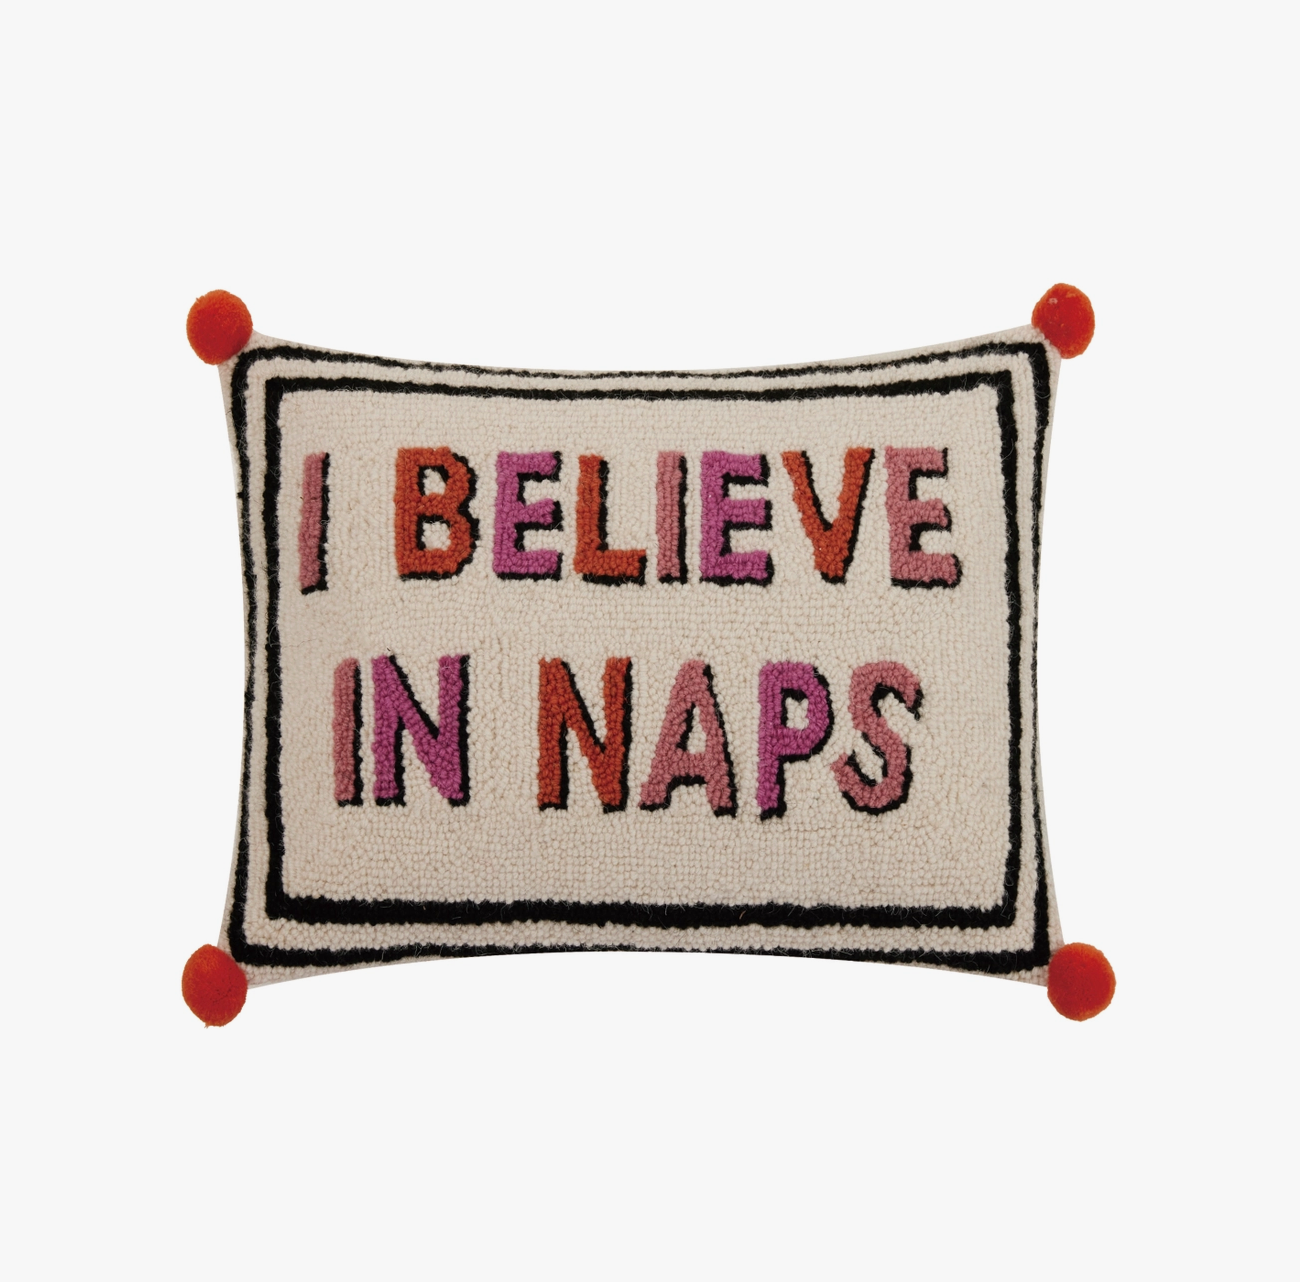 I Believe In Naps Pillow